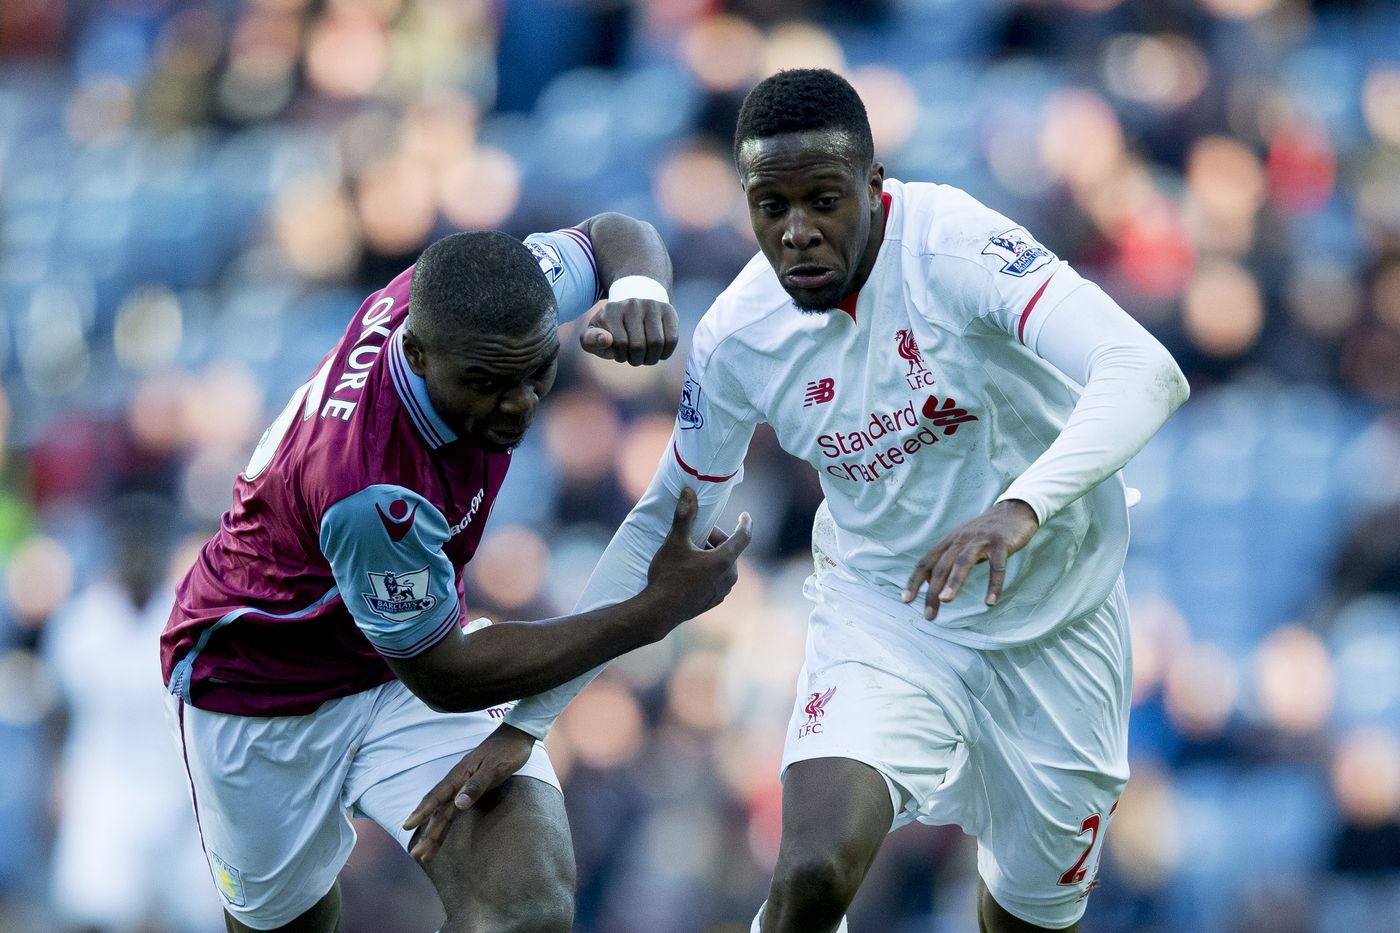 Aston Villa vs. Liverpool: Preview, Team News, and Ways to Watch - The Liverpool Offside